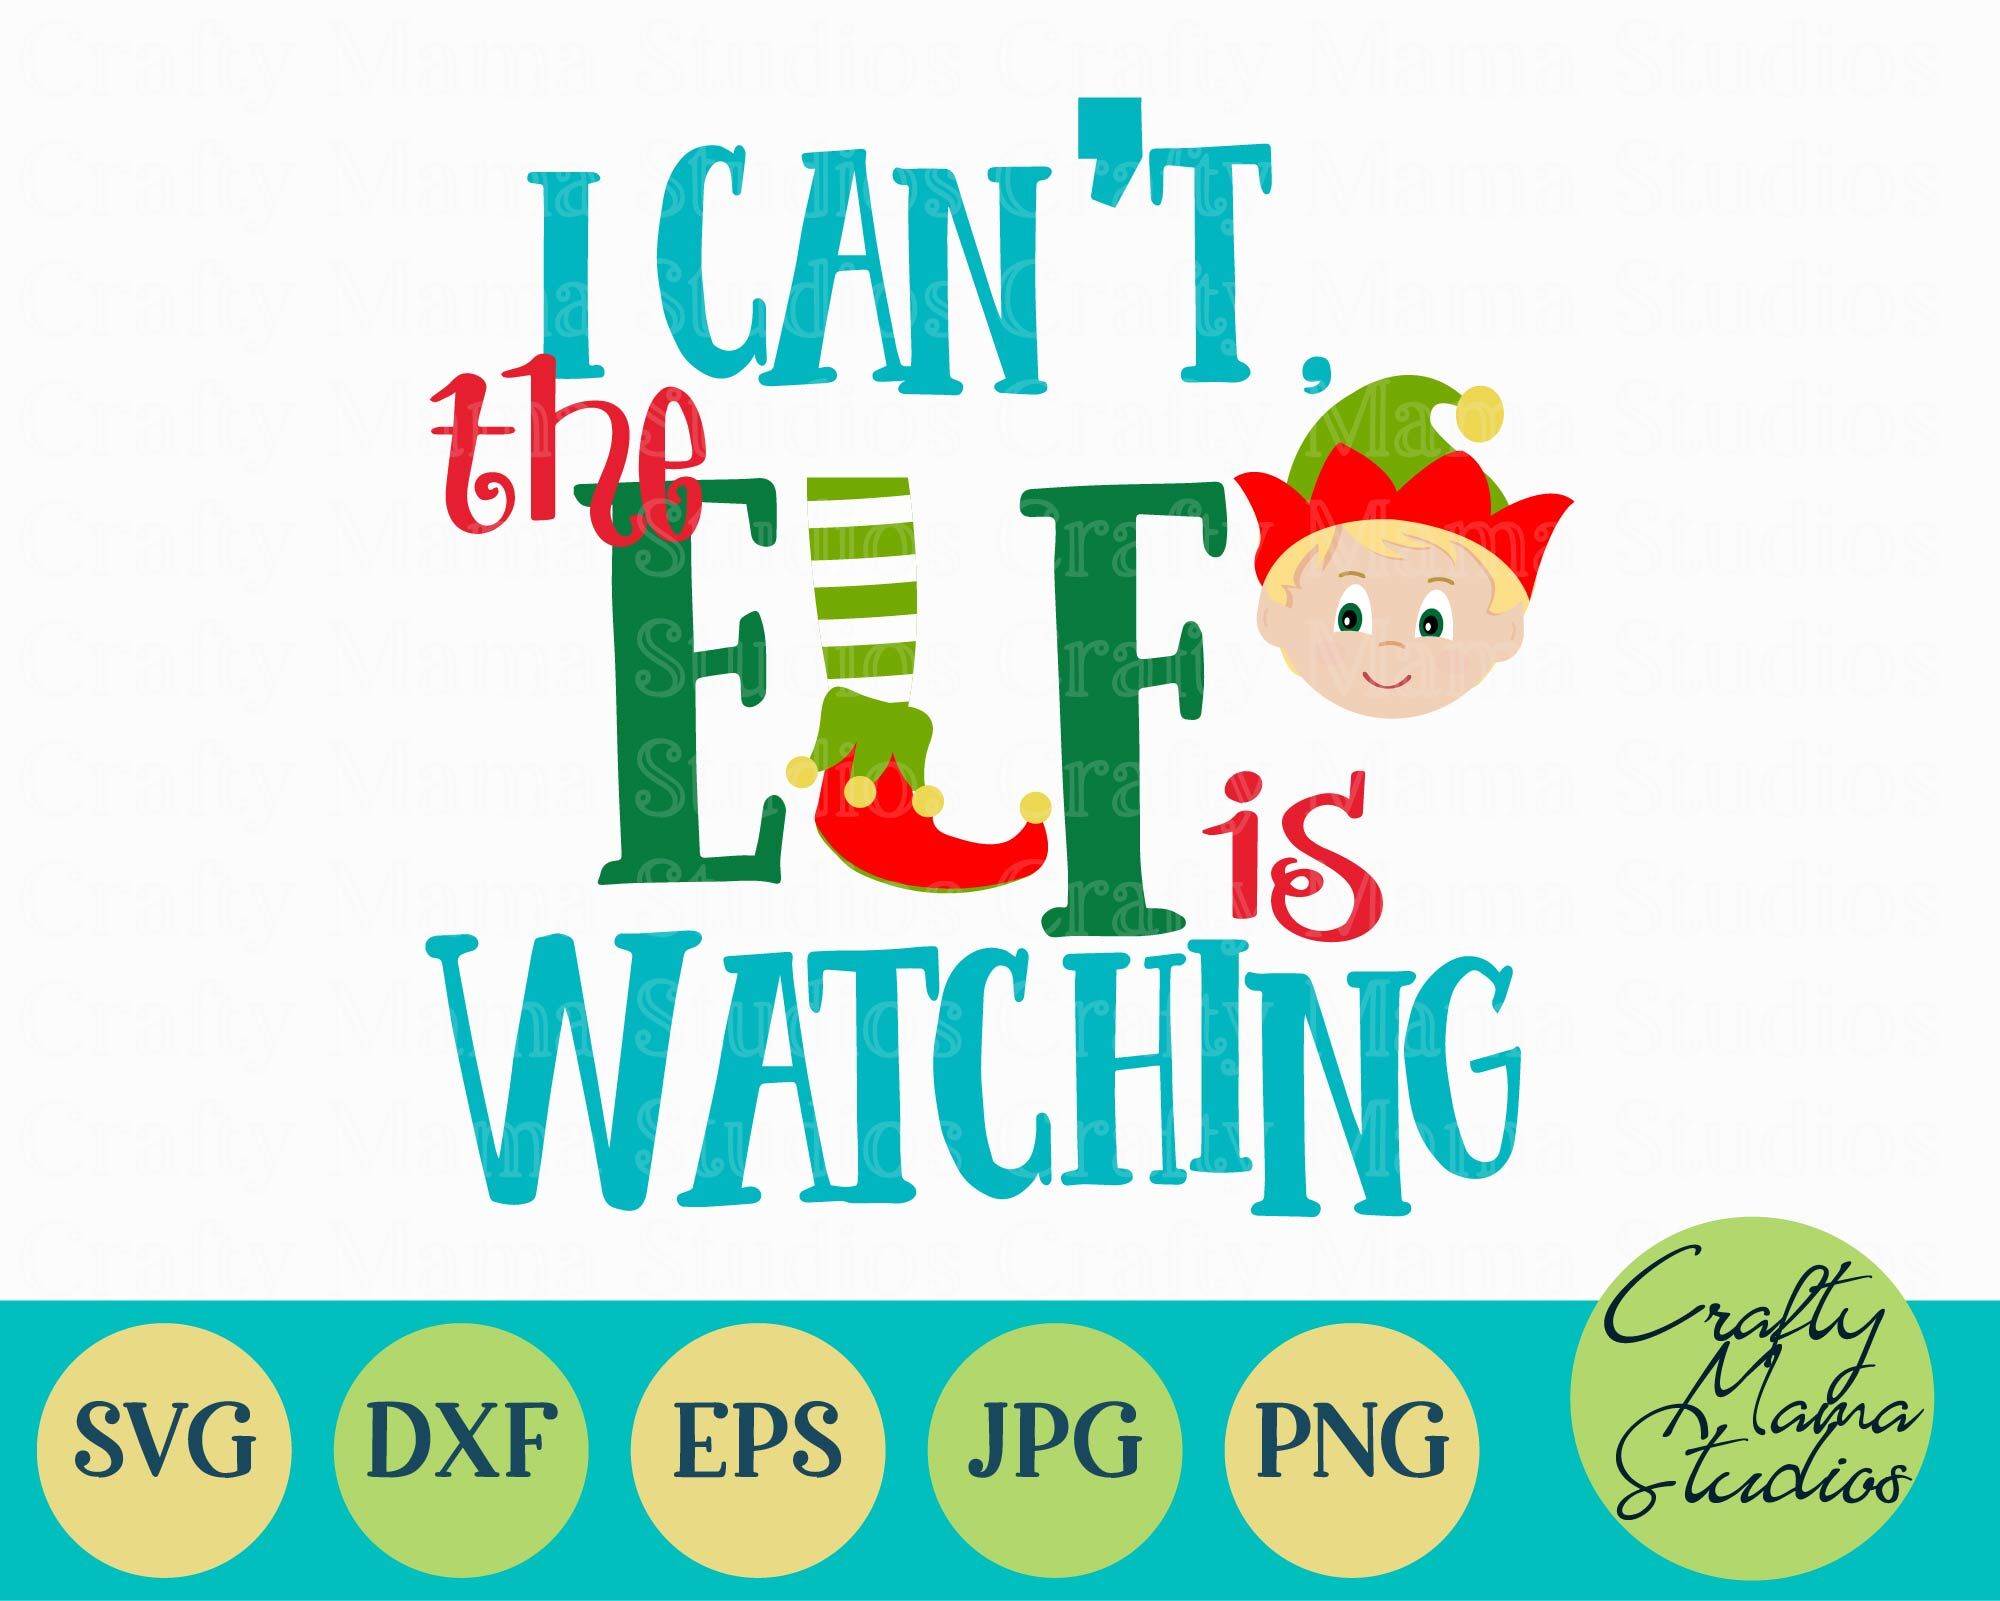 I Can T The Elf Is Watching Svg Christmas Svg By Crafty Mama Studios Thehungryjpeg Com